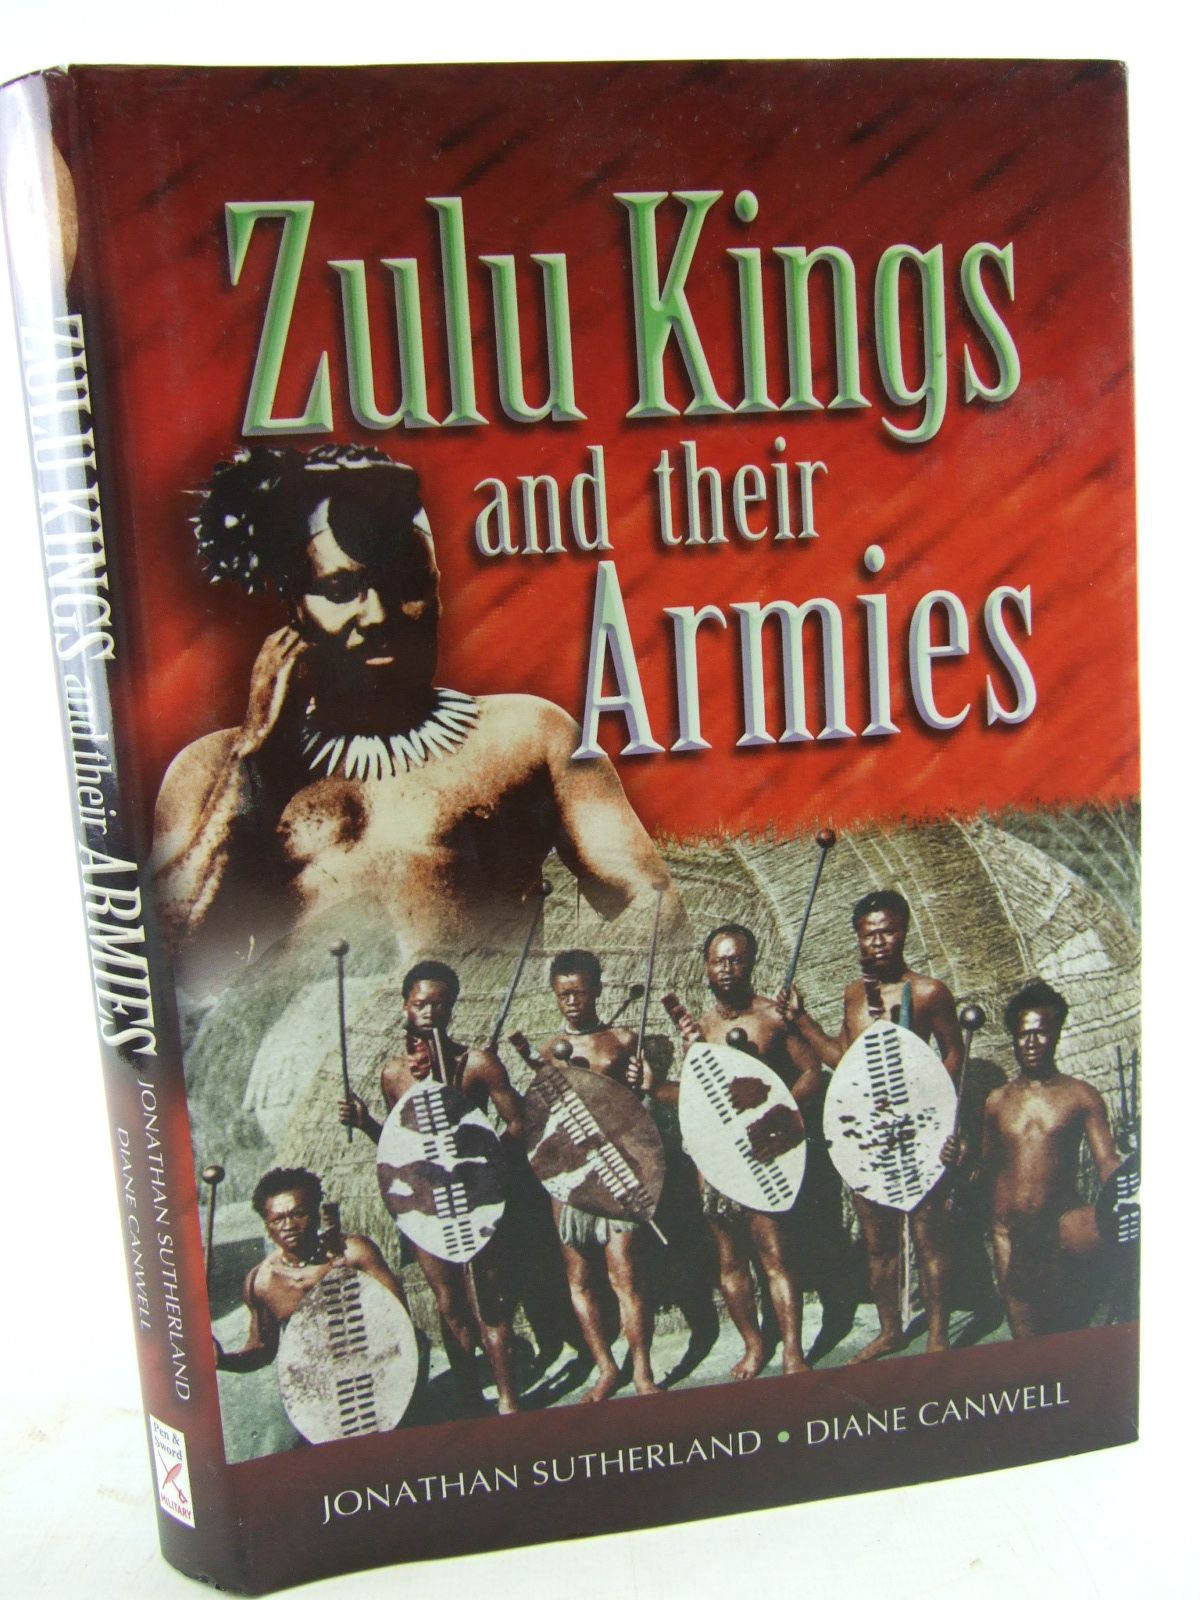 Photo of THE ZULU KINGS AND THEIR ARMIES written by Sutherland, Jonathan
Canwell, Diane published by Pen & Sword Military (STOCK CODE: 1805524)  for sale by Stella & Rose's Books